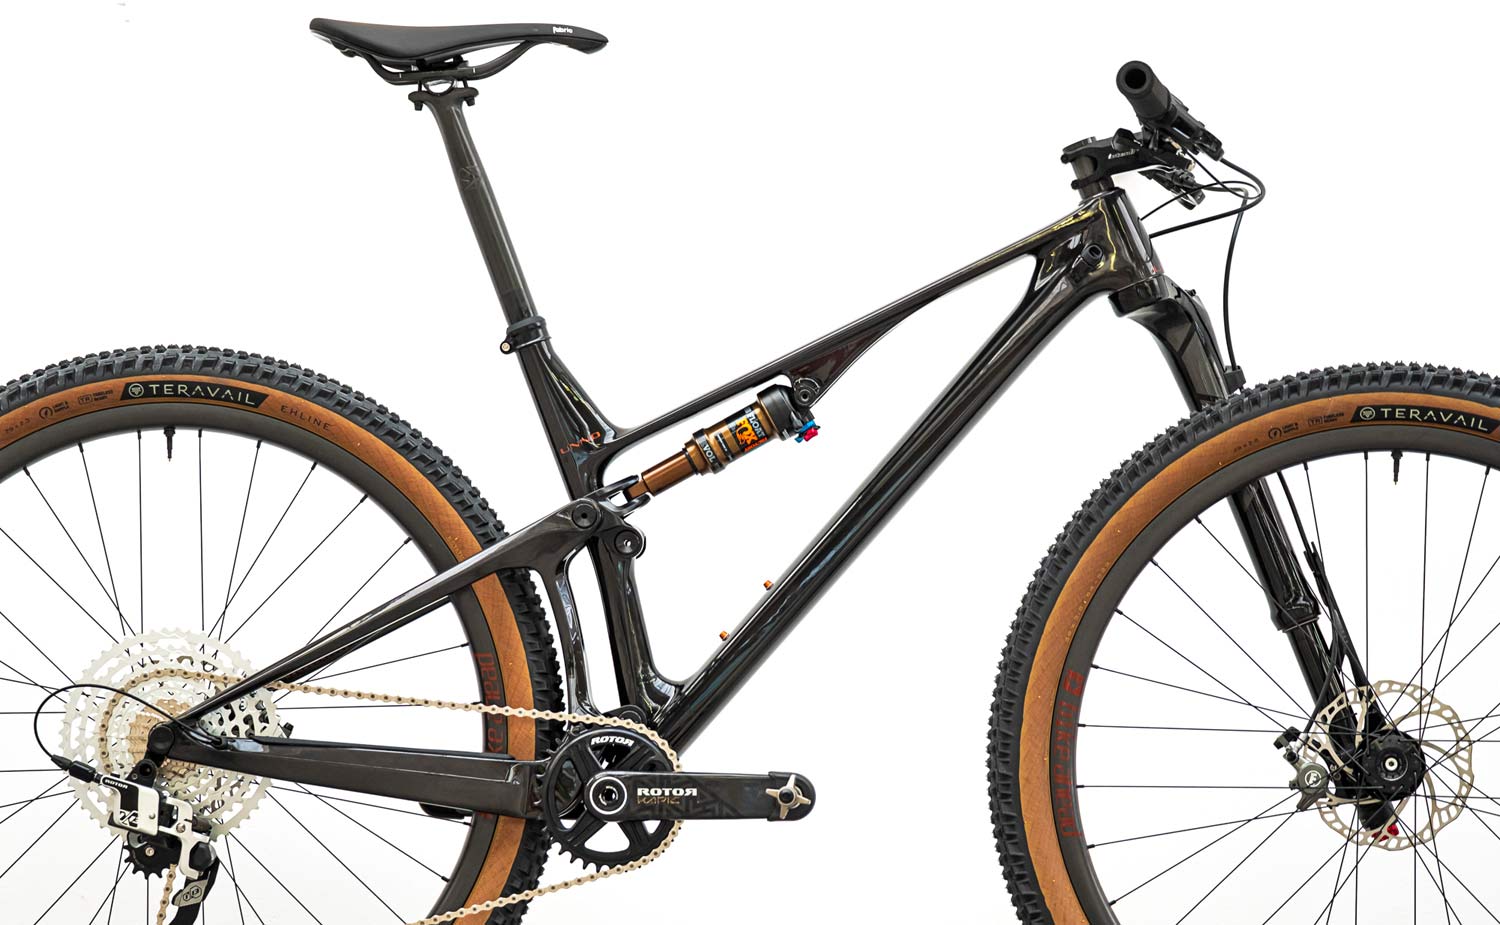 Unno Horn 100mm light carbon XC mountain bike by Light Wolf